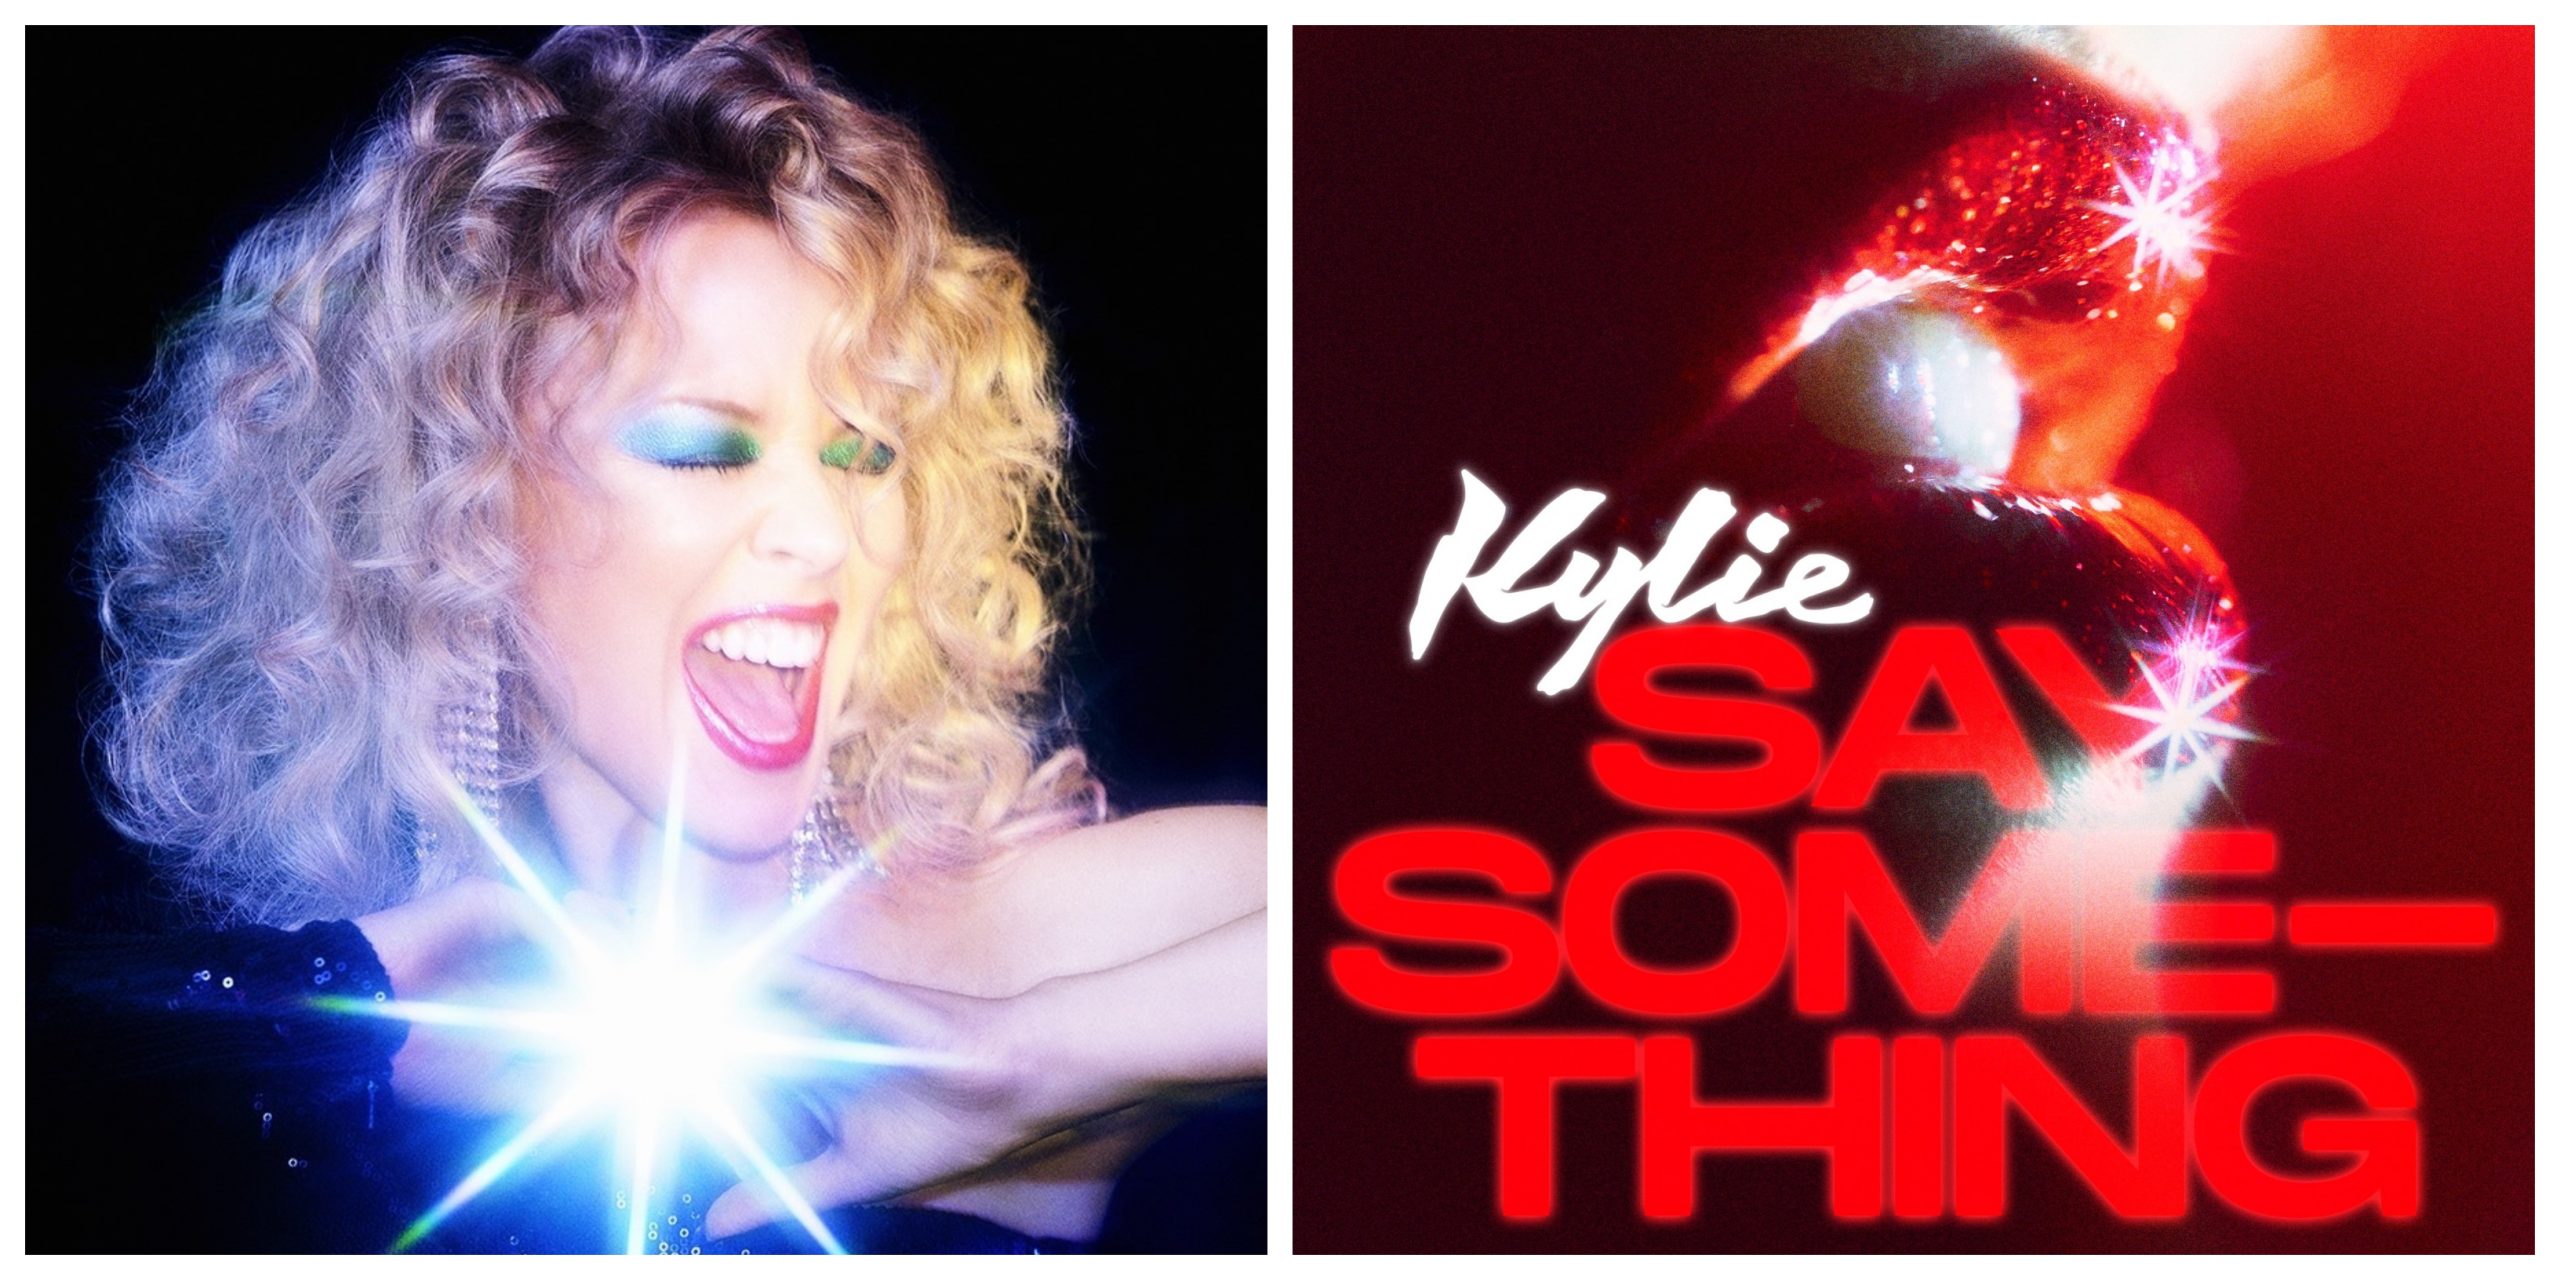 Kylie Reveals Incredible New Video For Her Single "Say Something"